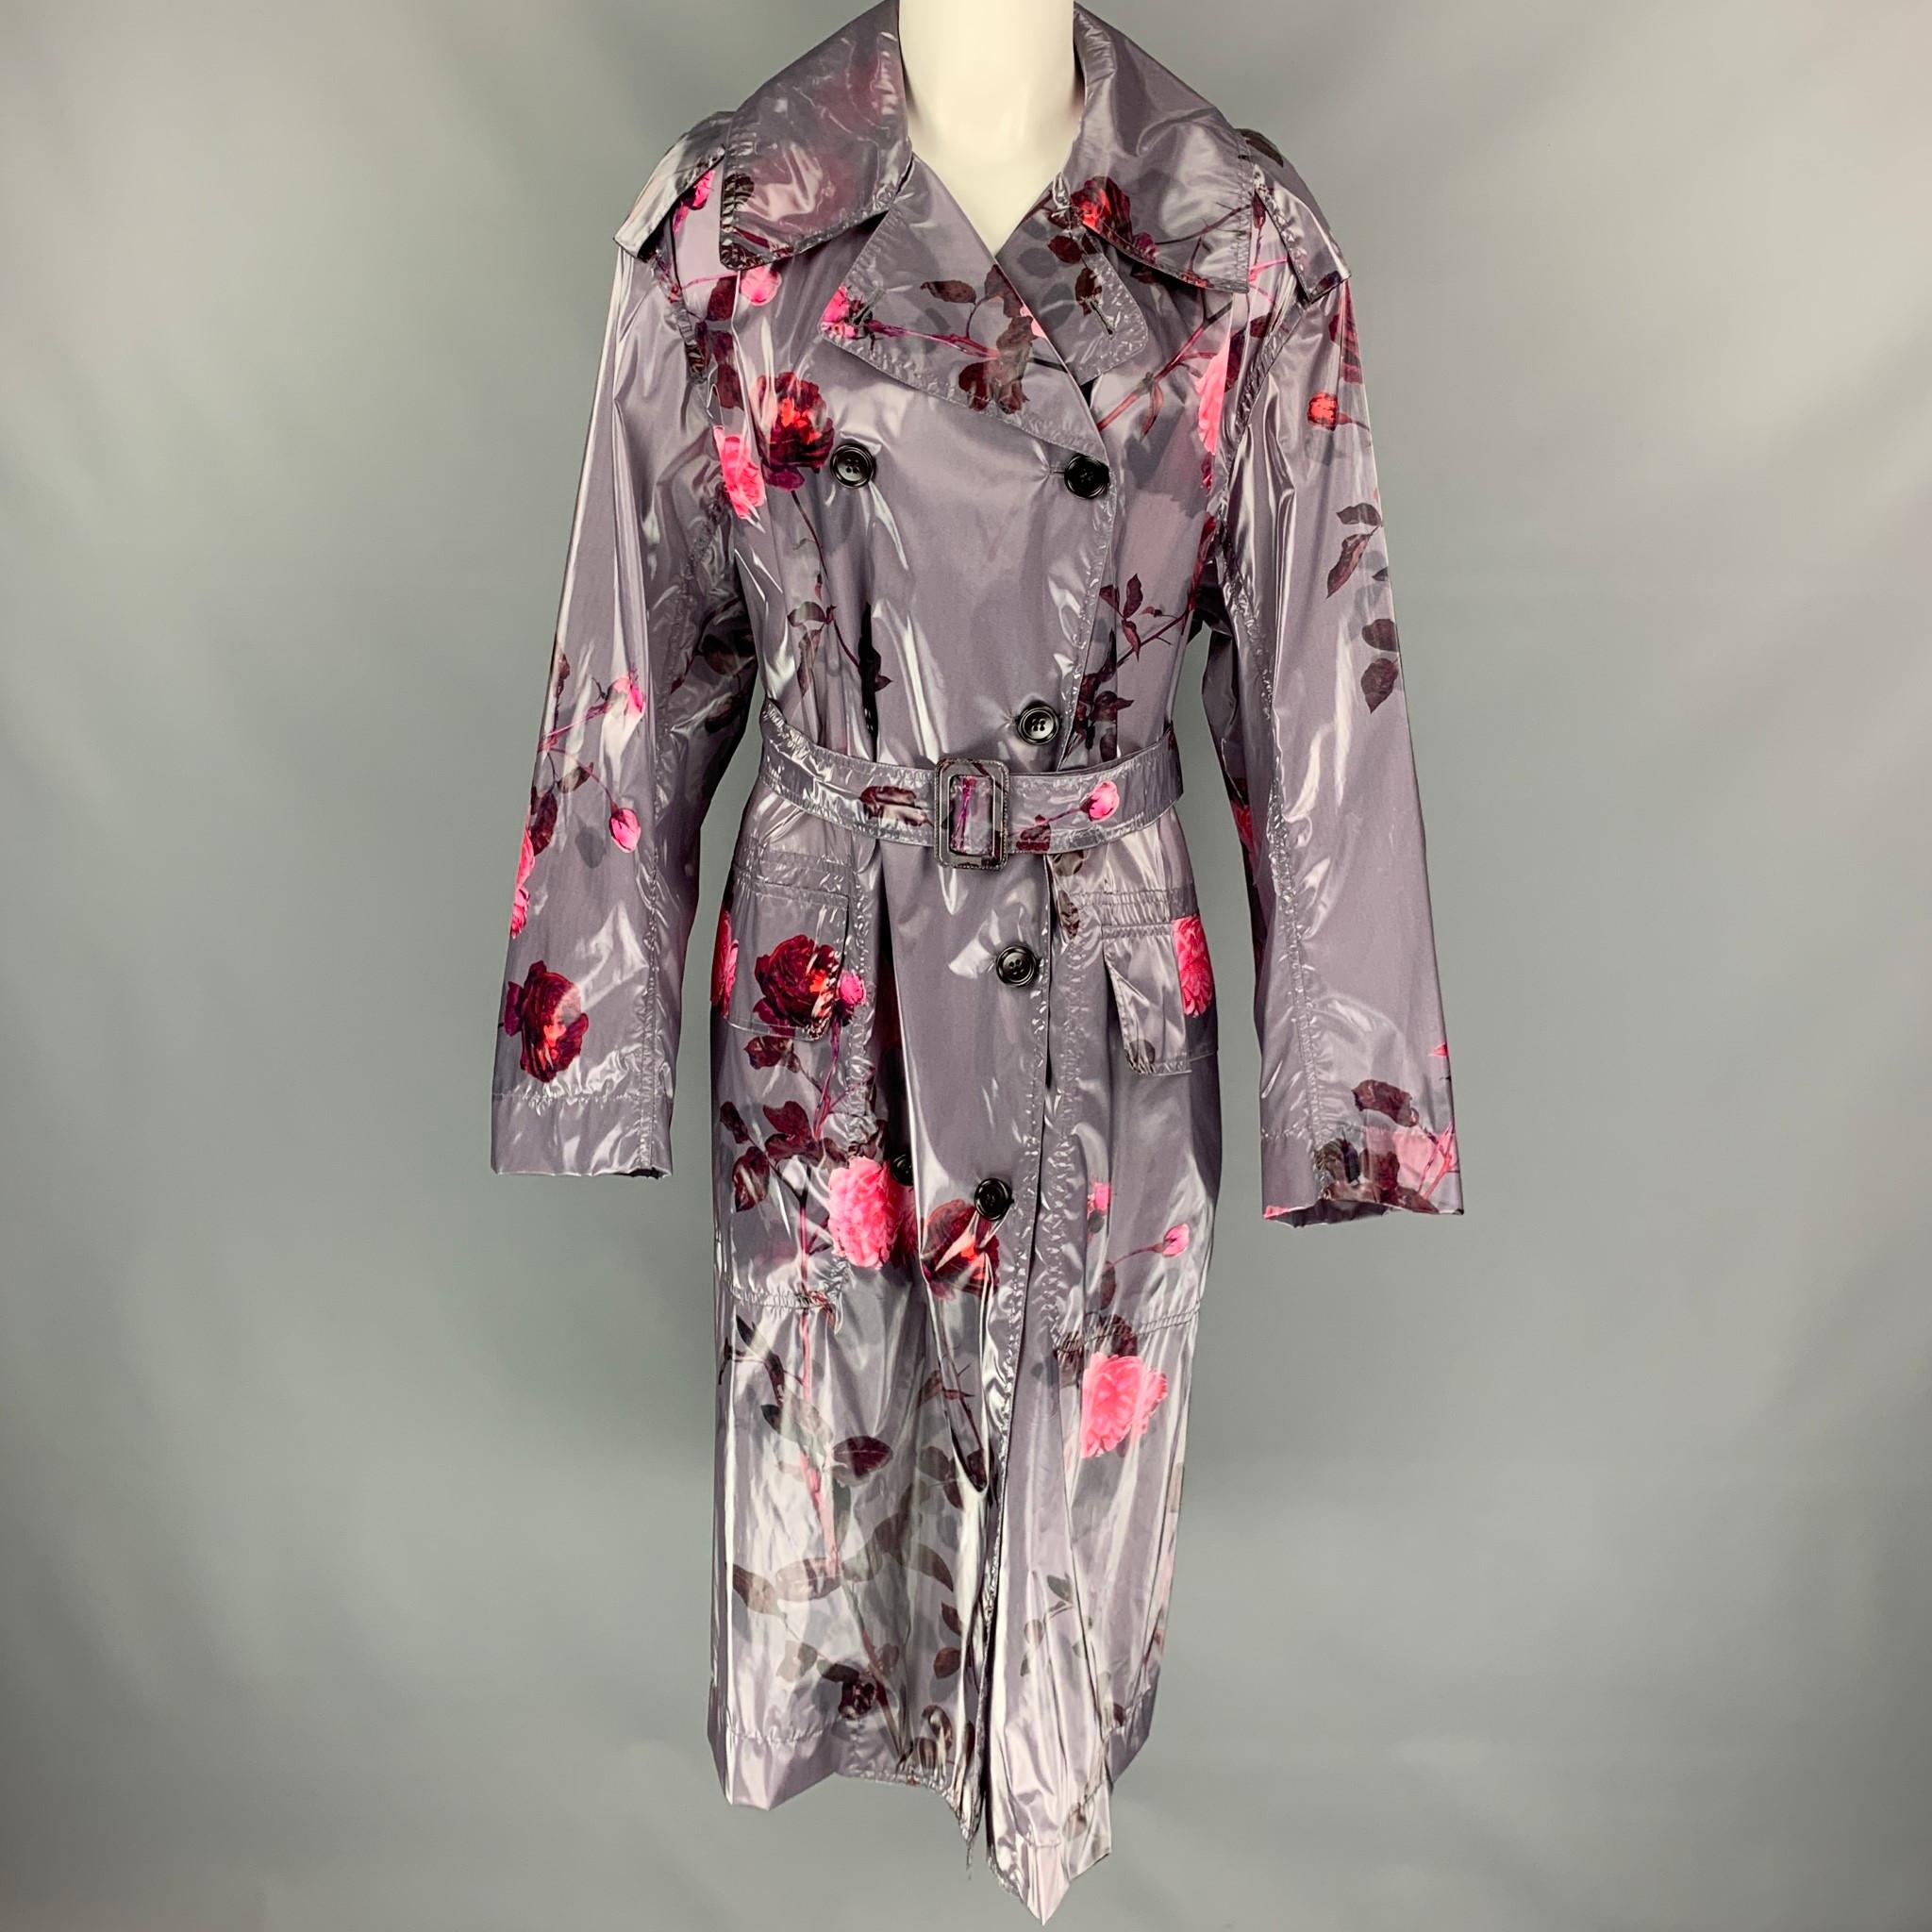 DRIES VAN NOTEN trench coat comes in a grey & pink floral polyurethane blend featuring a belted style, oversized fit, flap pockets, and a double breasted closure. Made in Poland. 

New With Tags. 
Marked: XS
Original Retail Price: